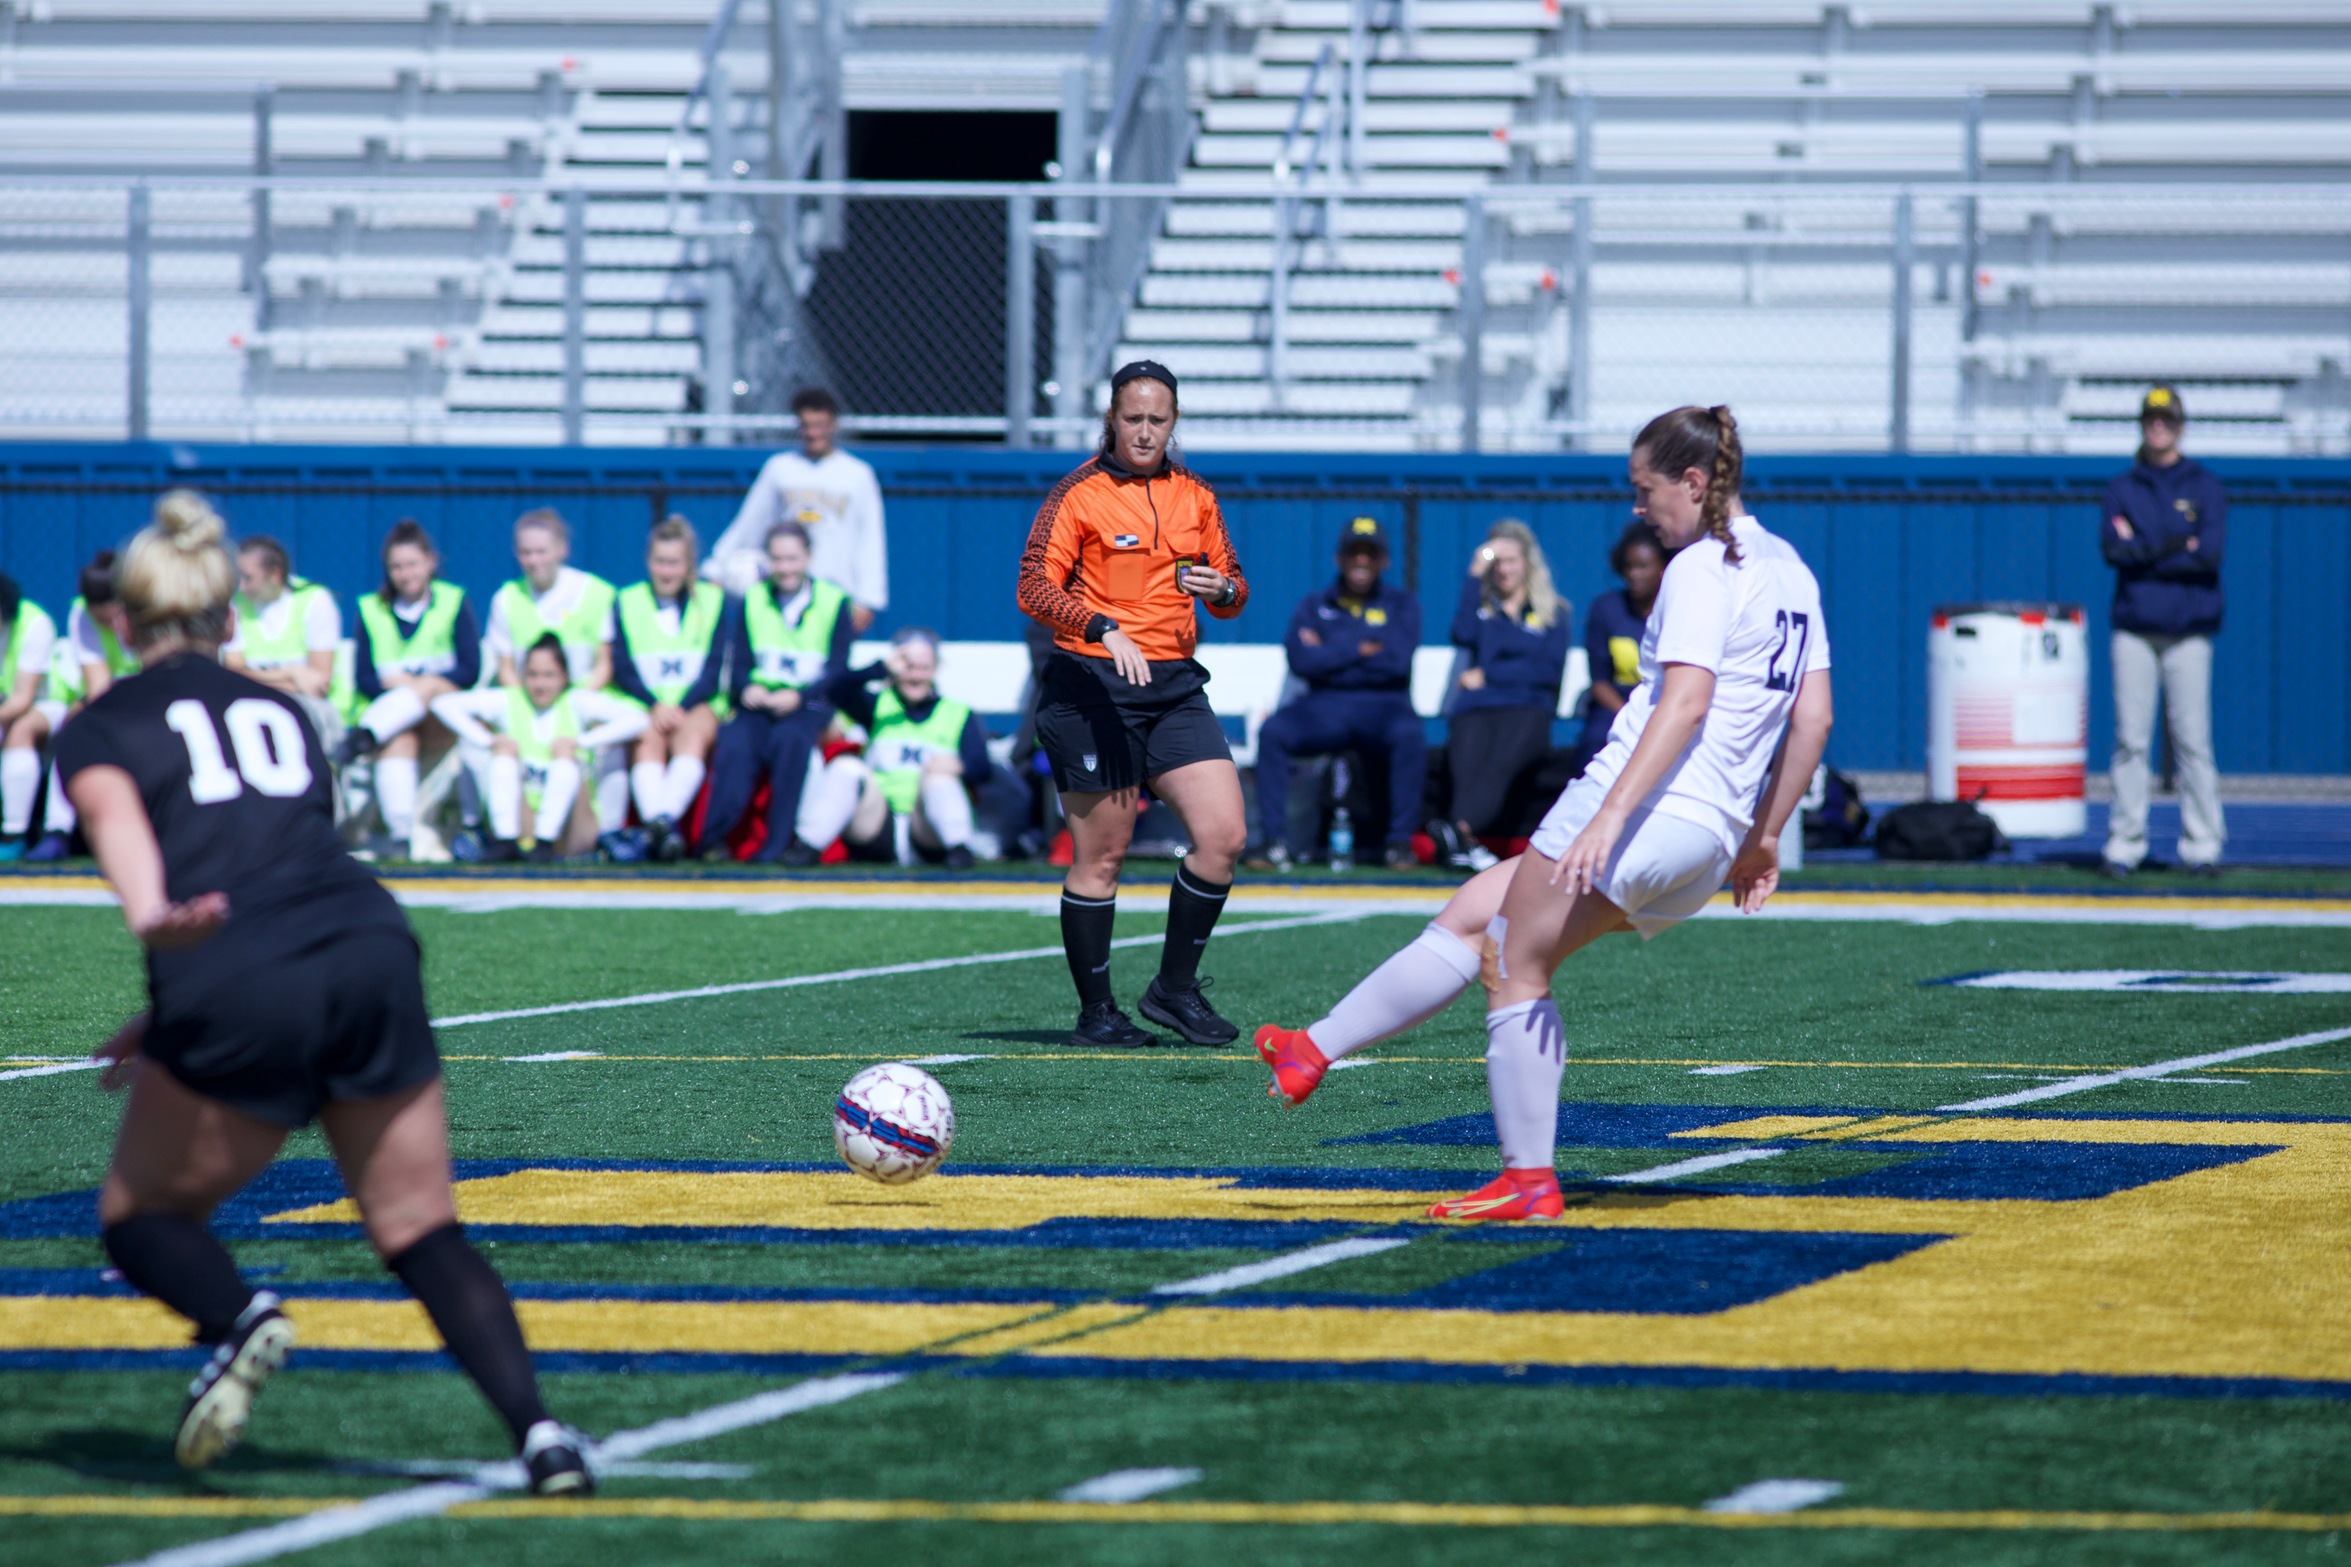 Melania Skamiera, seen here in other action, scored for the Wolverines.